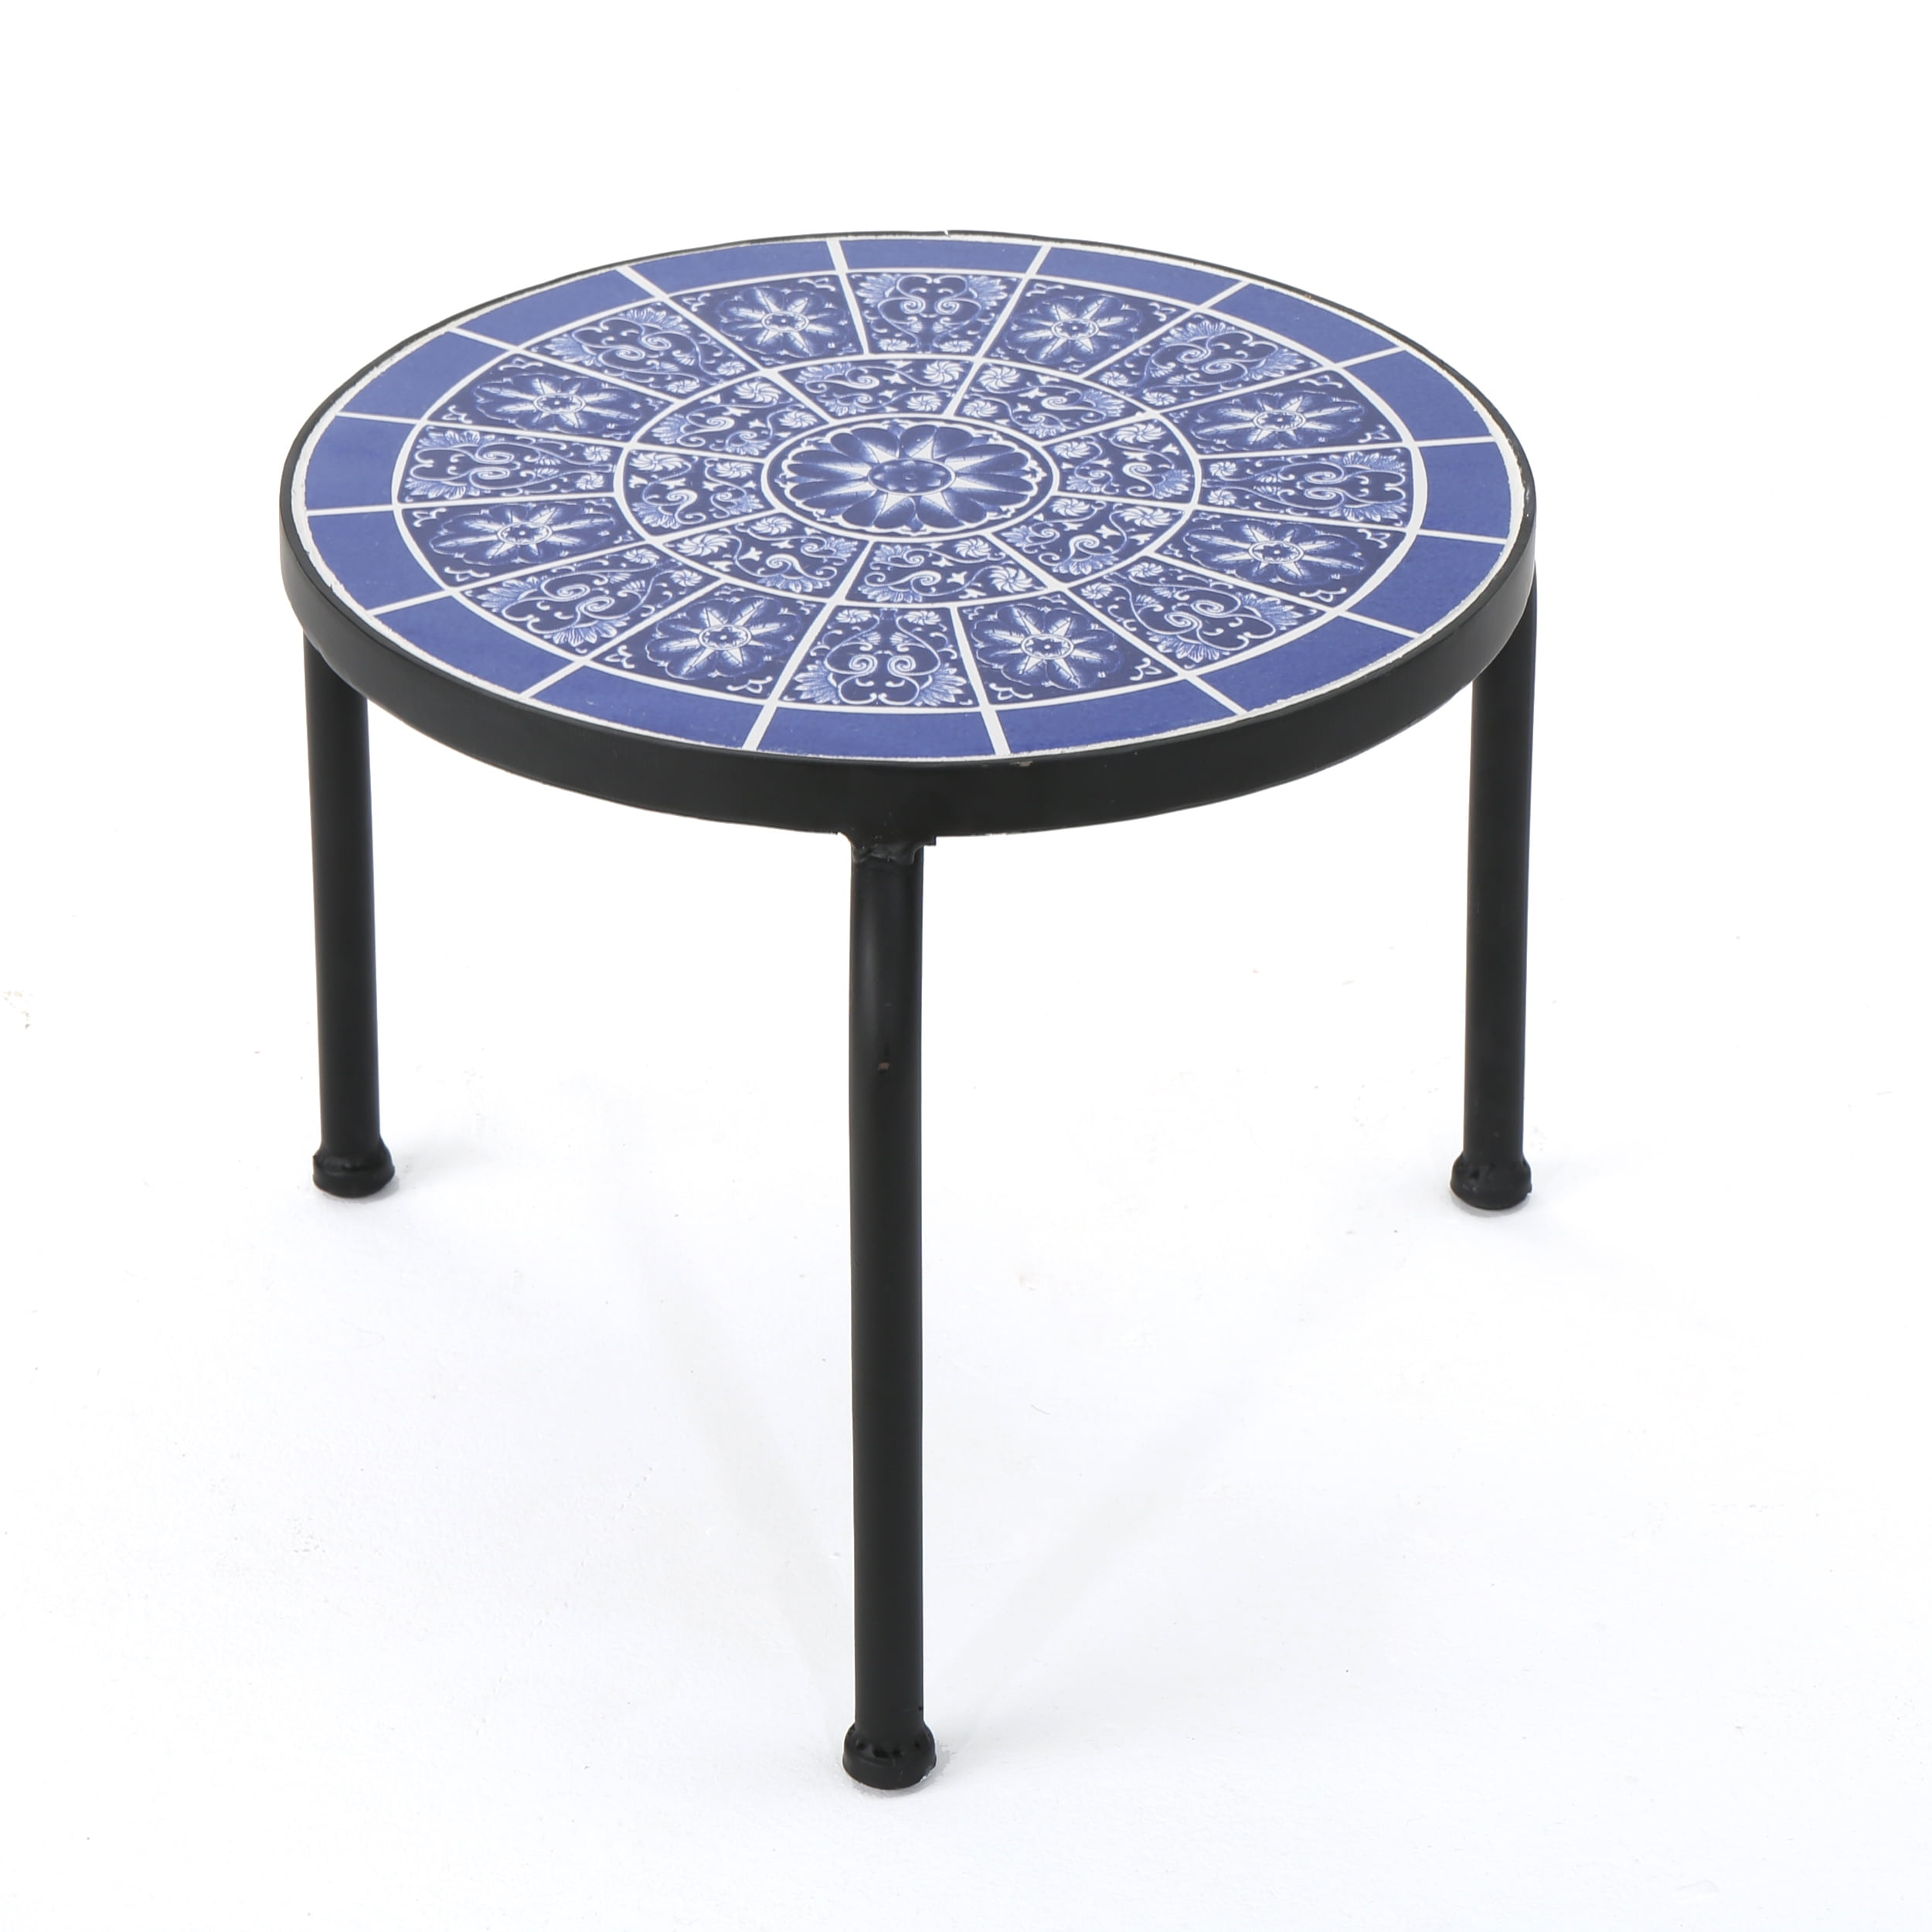 Soleil Outdoor Ceramic Tile Side Table with Iron Frame, Blue and White